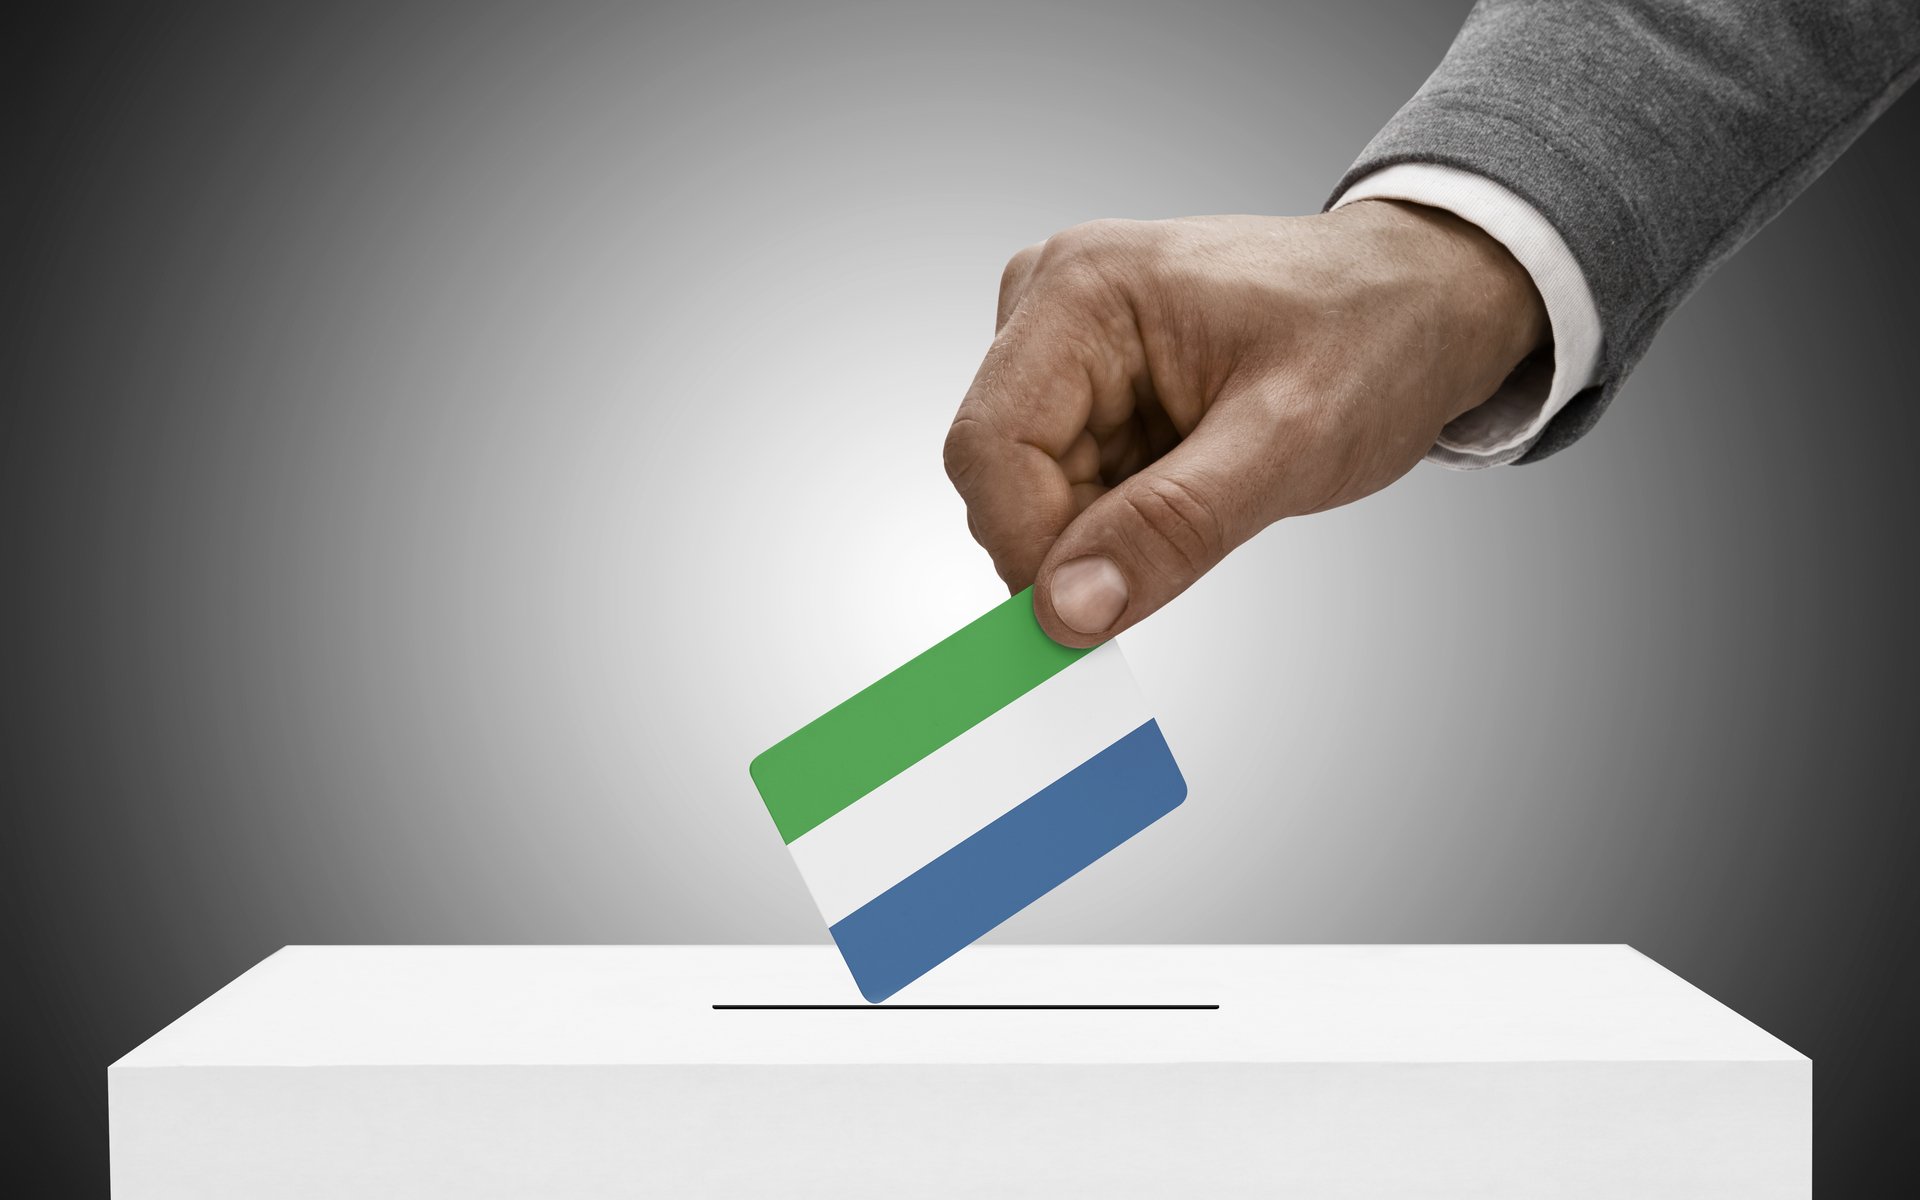 Sierra Leone Becomes First Country With Blockchain-Verified Election Voting